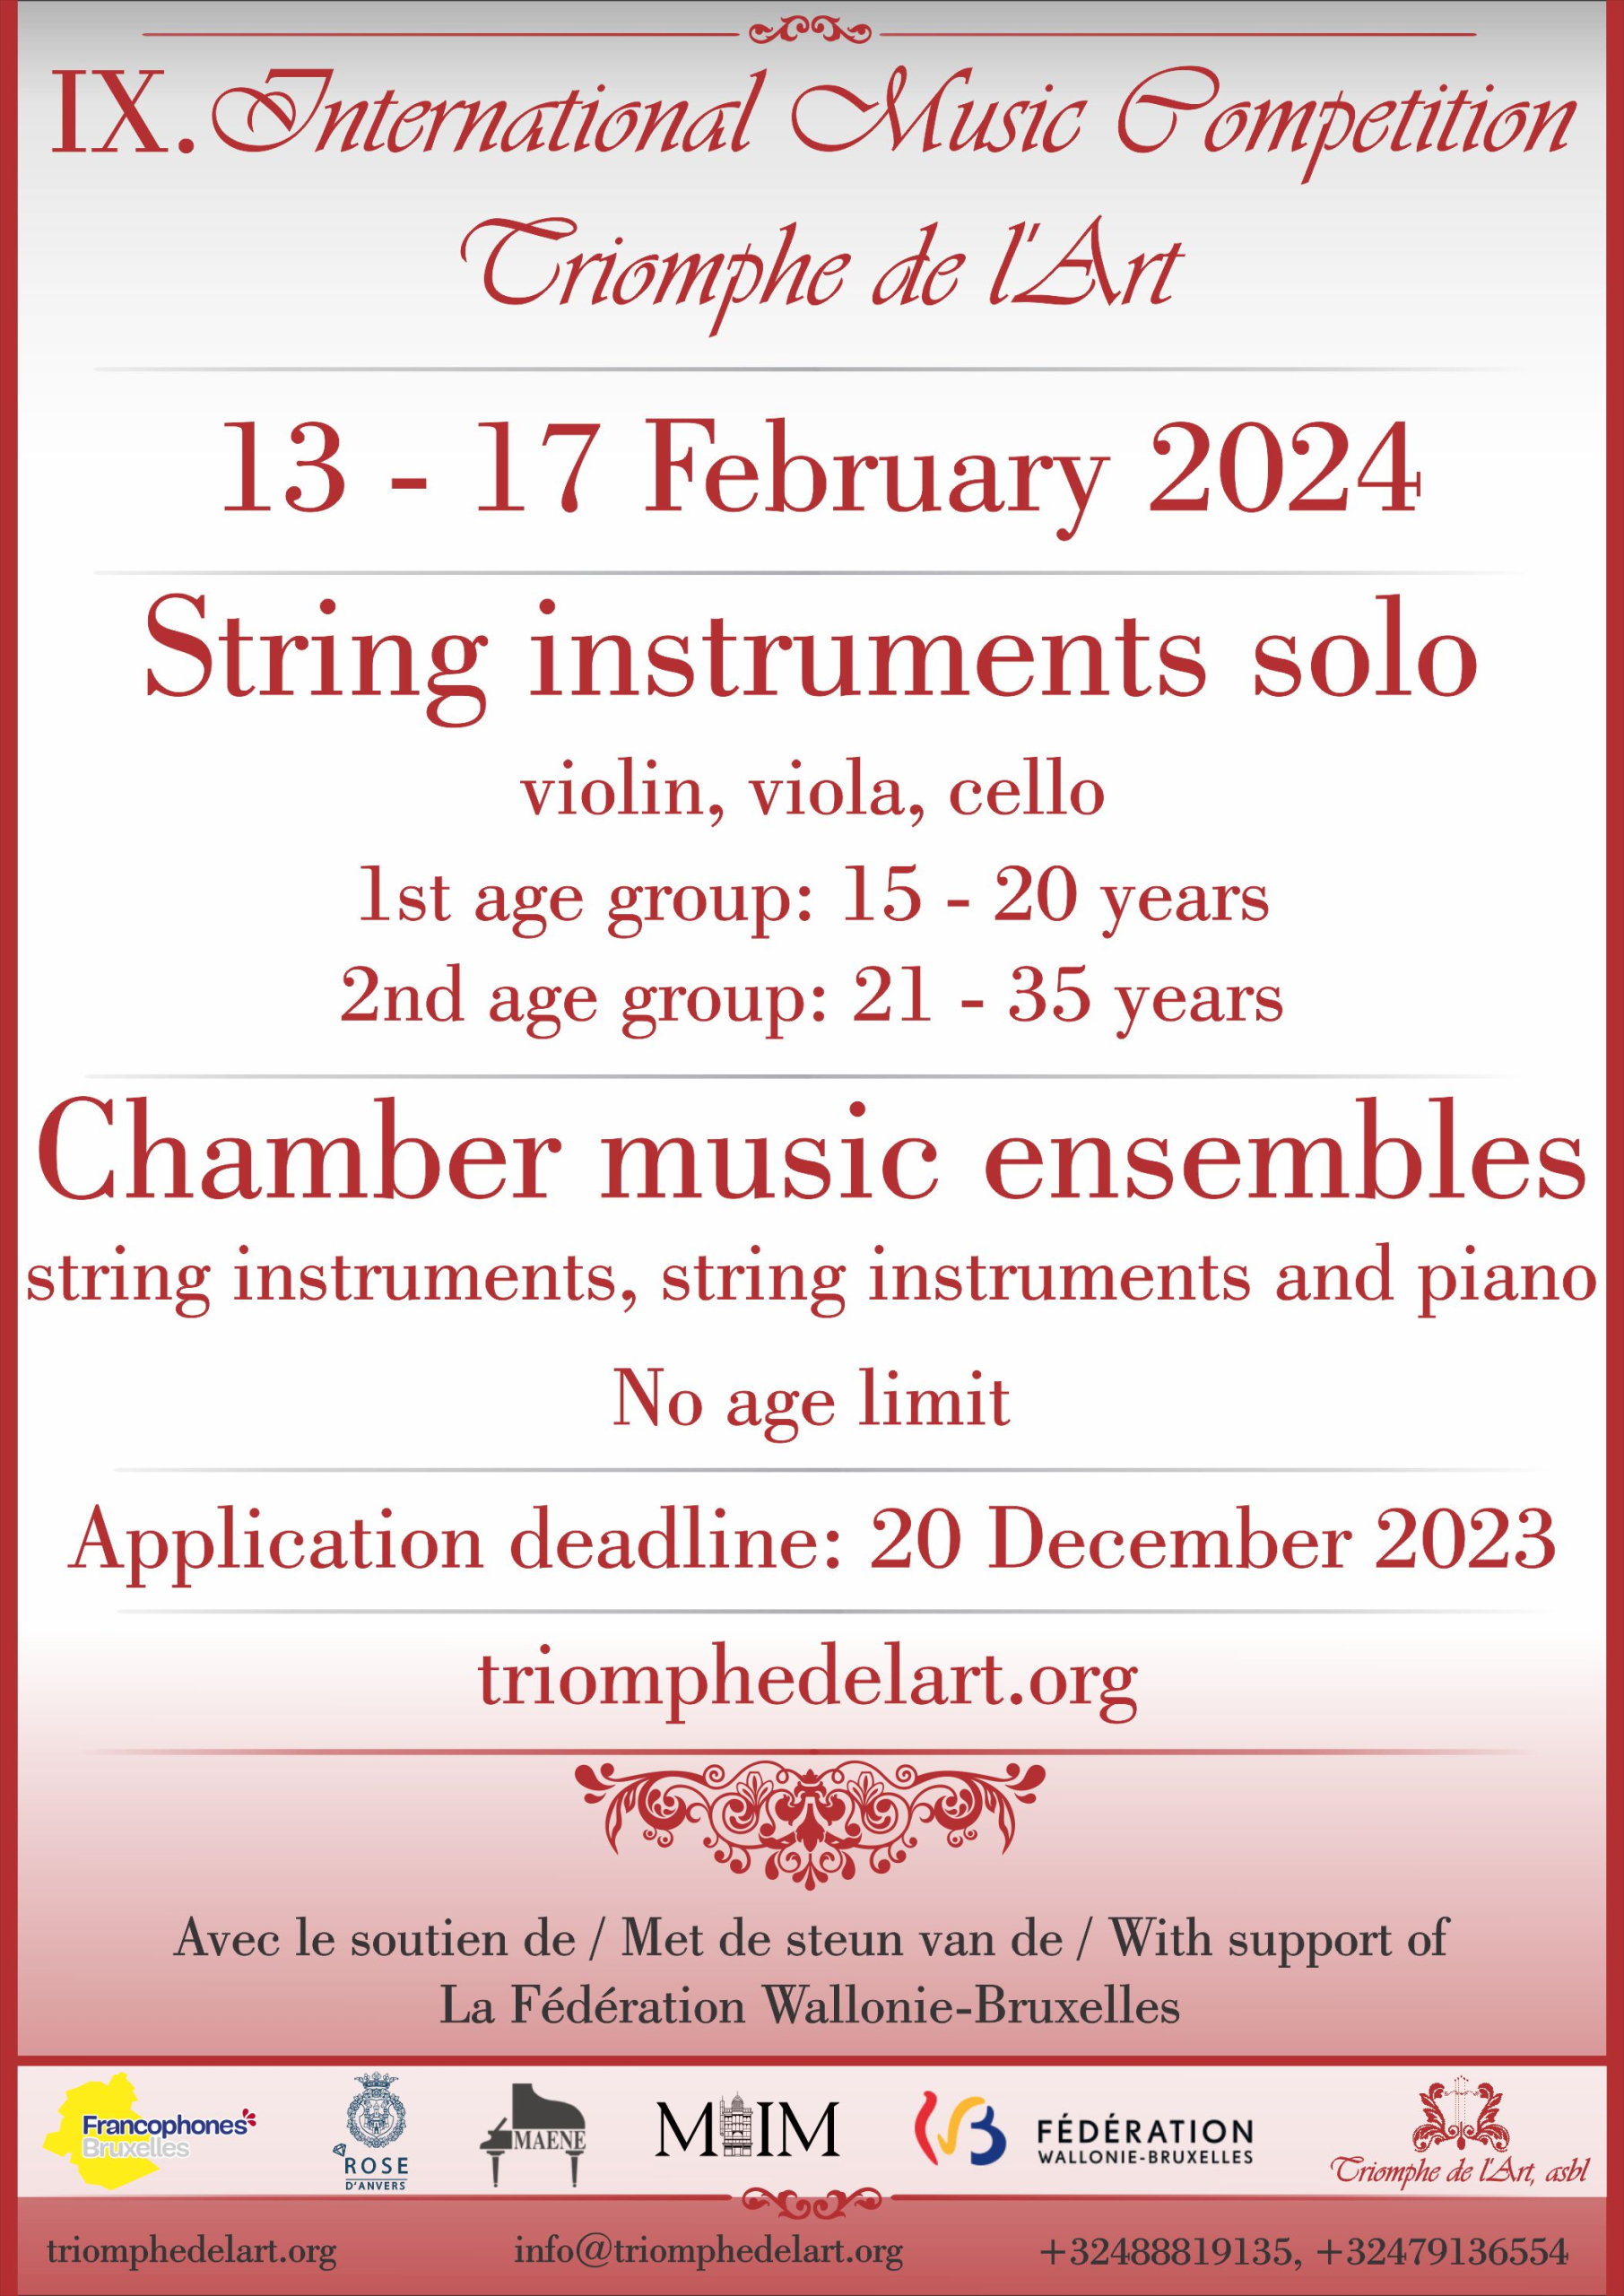 9th International Music Competition Triomphe de l'Art in disciplines String Instruments and Chamber Music